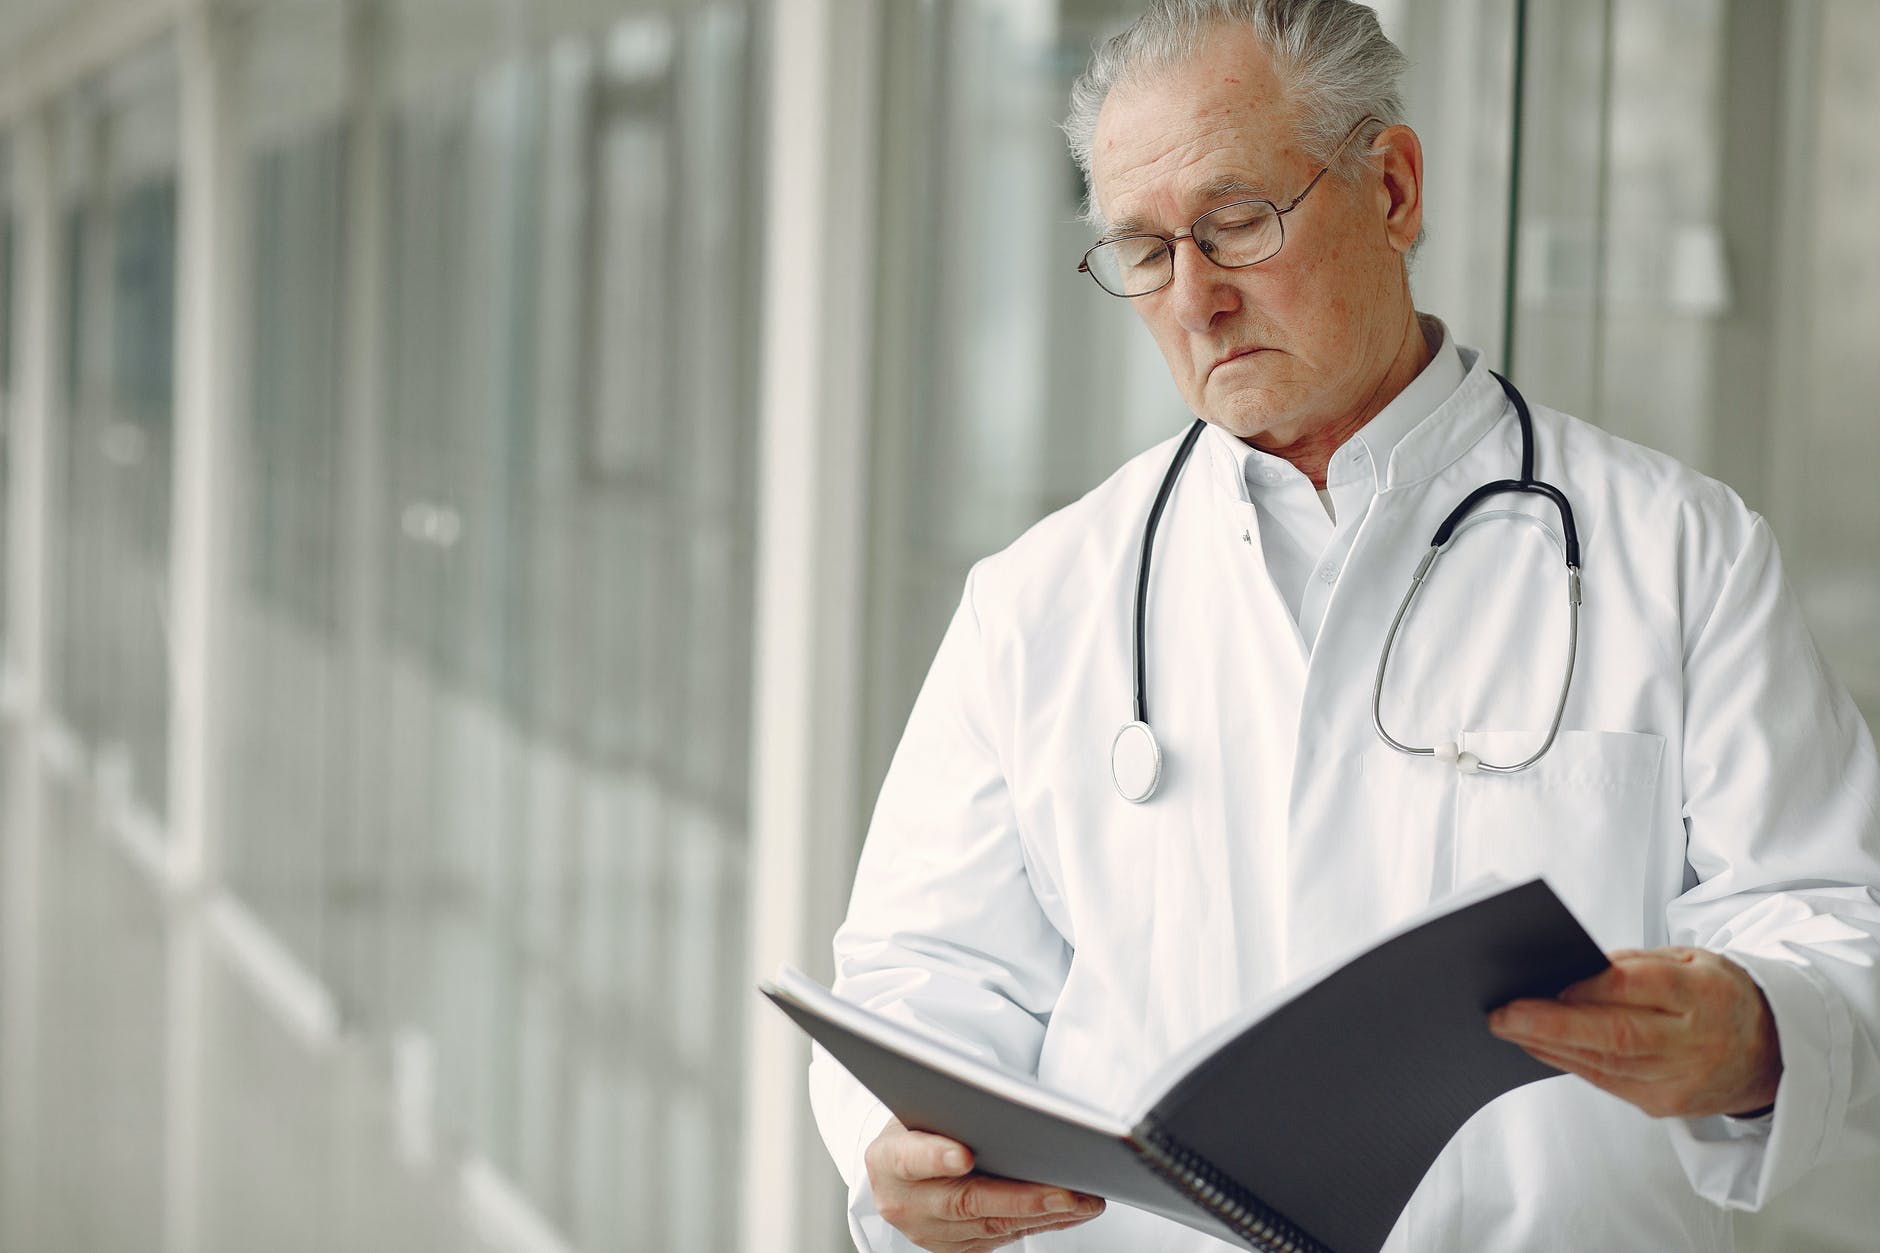 Doctor looking at a folder | Source: Pexels